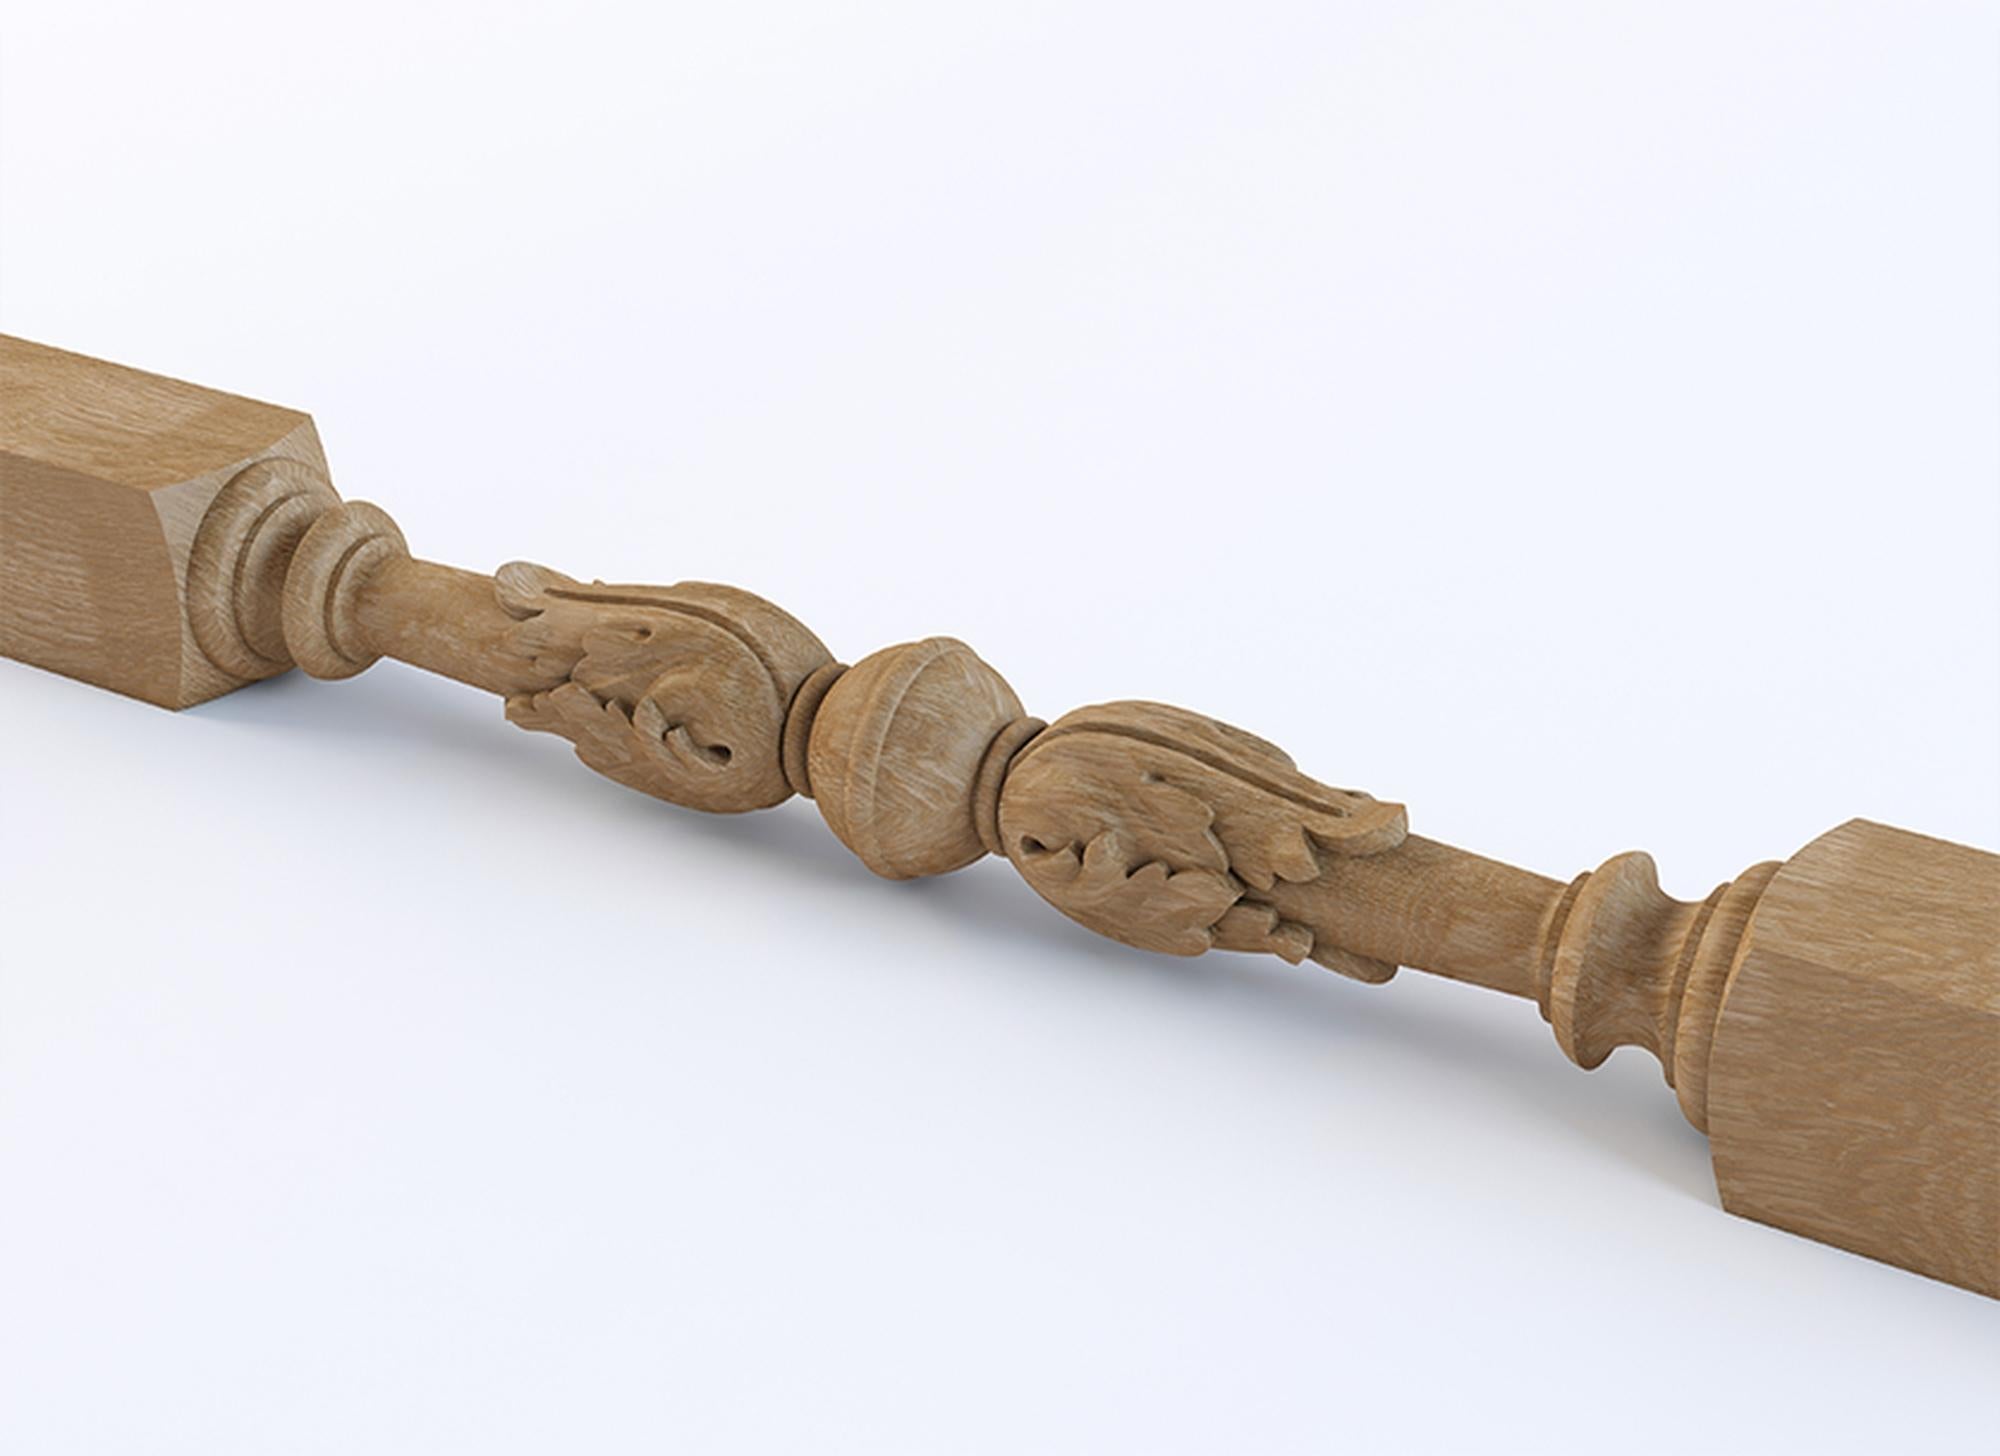 Unfinished high quality carved newel post from oak or beech of your choice.

>> SKU: L-071

>> Dimensions (A x B):

- 46.06